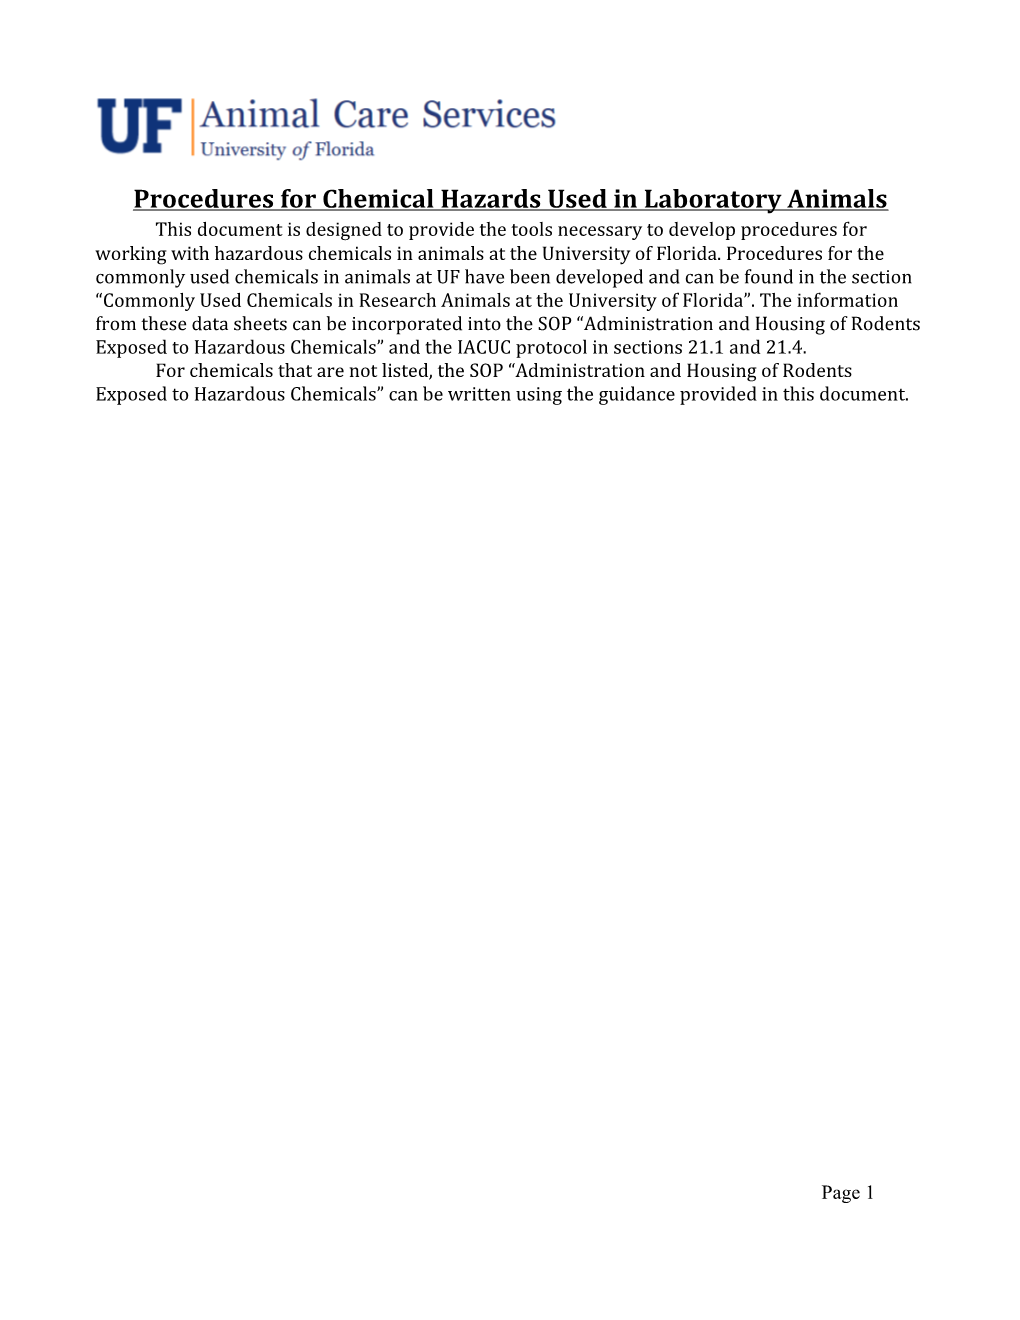 Procedures for Chemical Hazards Used in Laboratory Animals